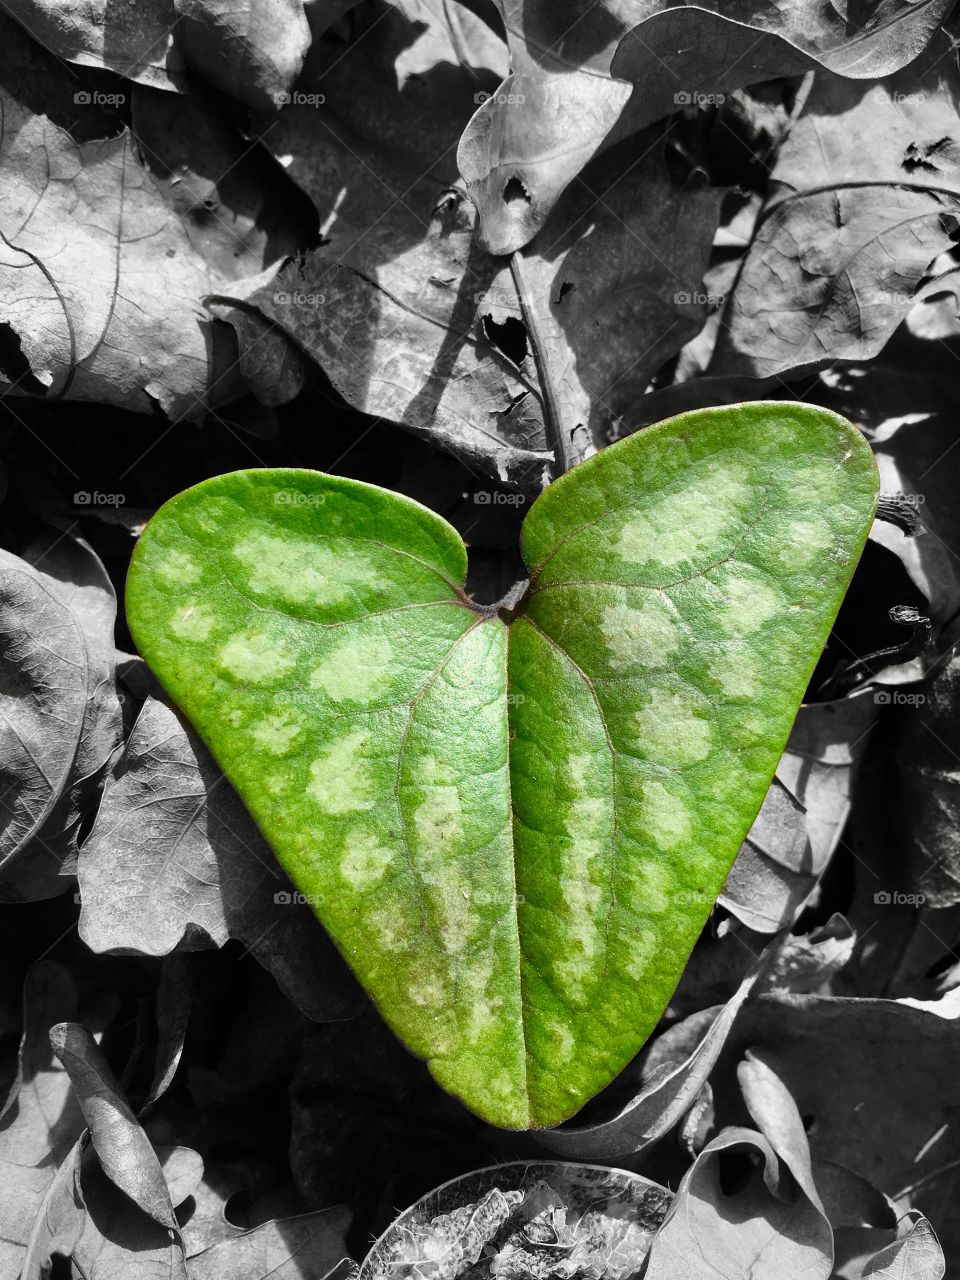 For the love of nature. A color pop edit of a green leaf among the grayscale of the foliage of the forest floor